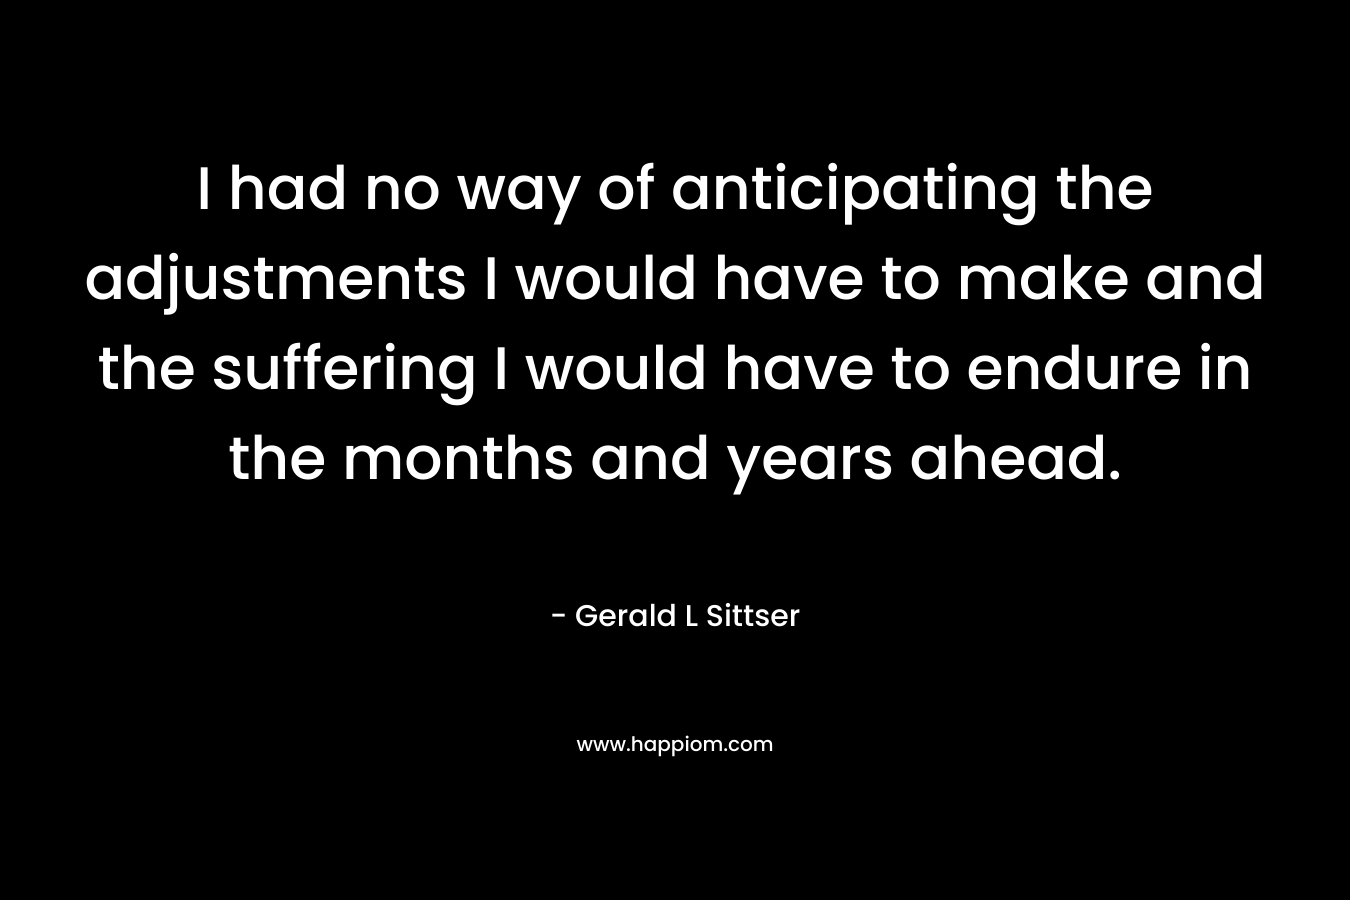 I had no way of anticipating the adjustments I would have to make and the suffering I would have to endure in the months and years ahead. – Gerald L Sittser